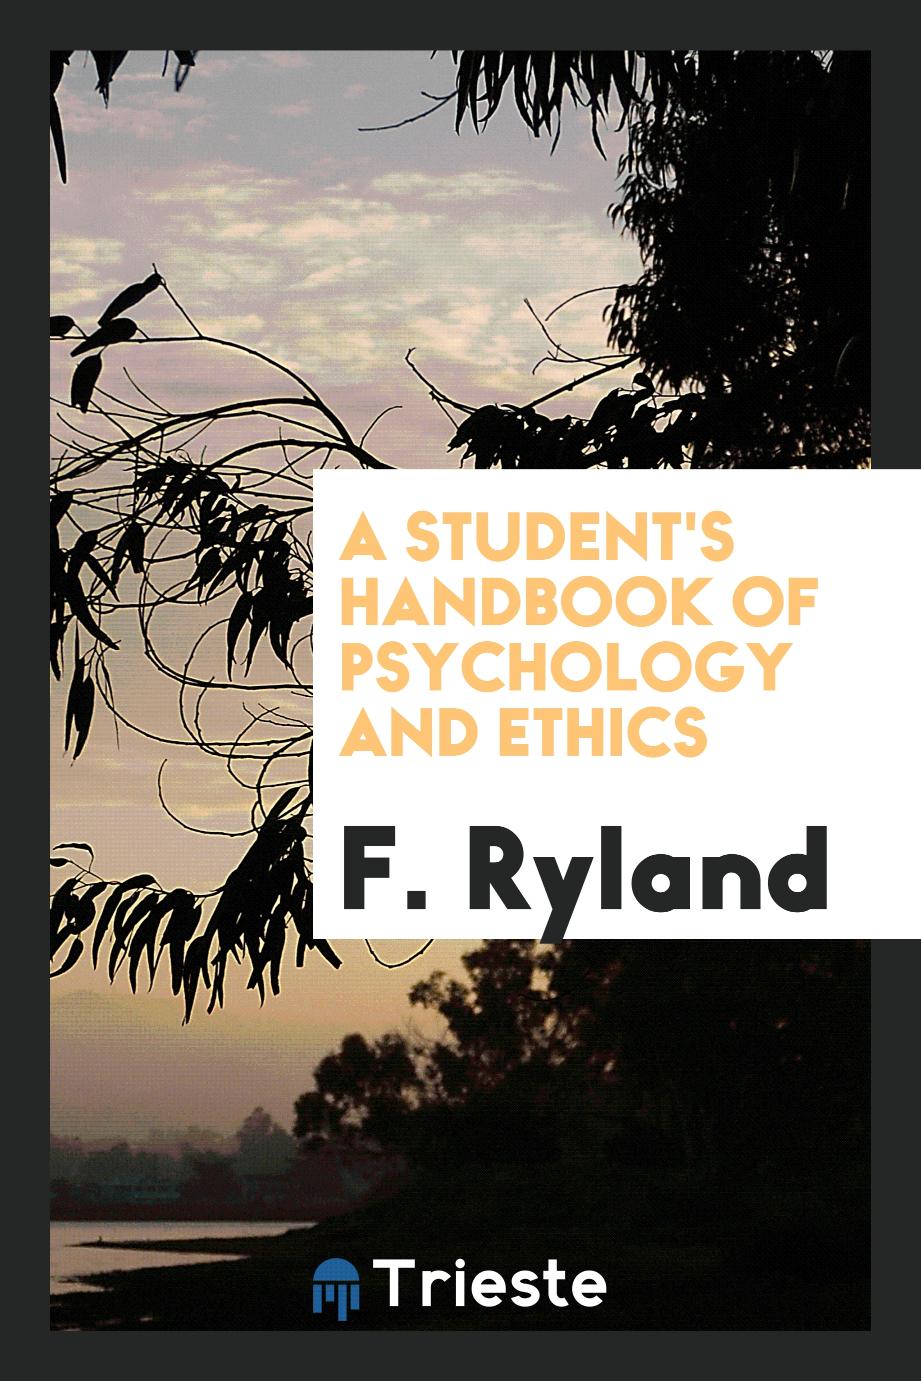 A Student's Handbook of Psychology and Ethics